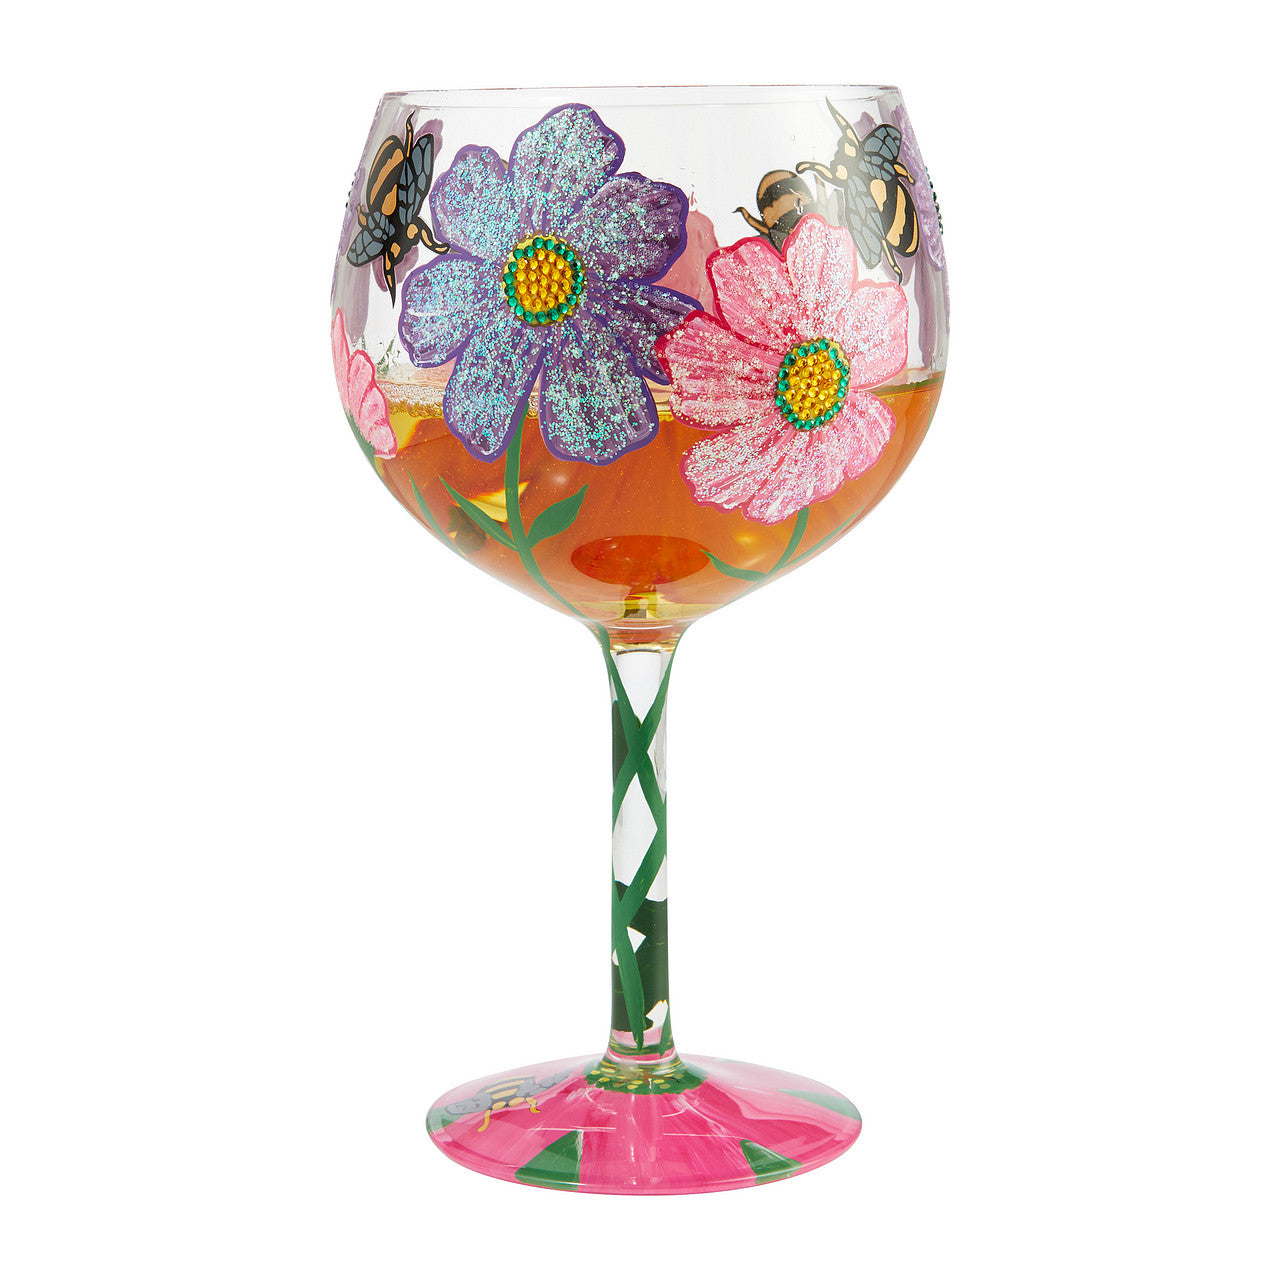 My Drinking Garden Gin Glass  Bring your magical garden to the table with this whimsical wine glass. The perfect complement to any dinnerware style, watch your dinner party blossom into the garden of your dreams. 